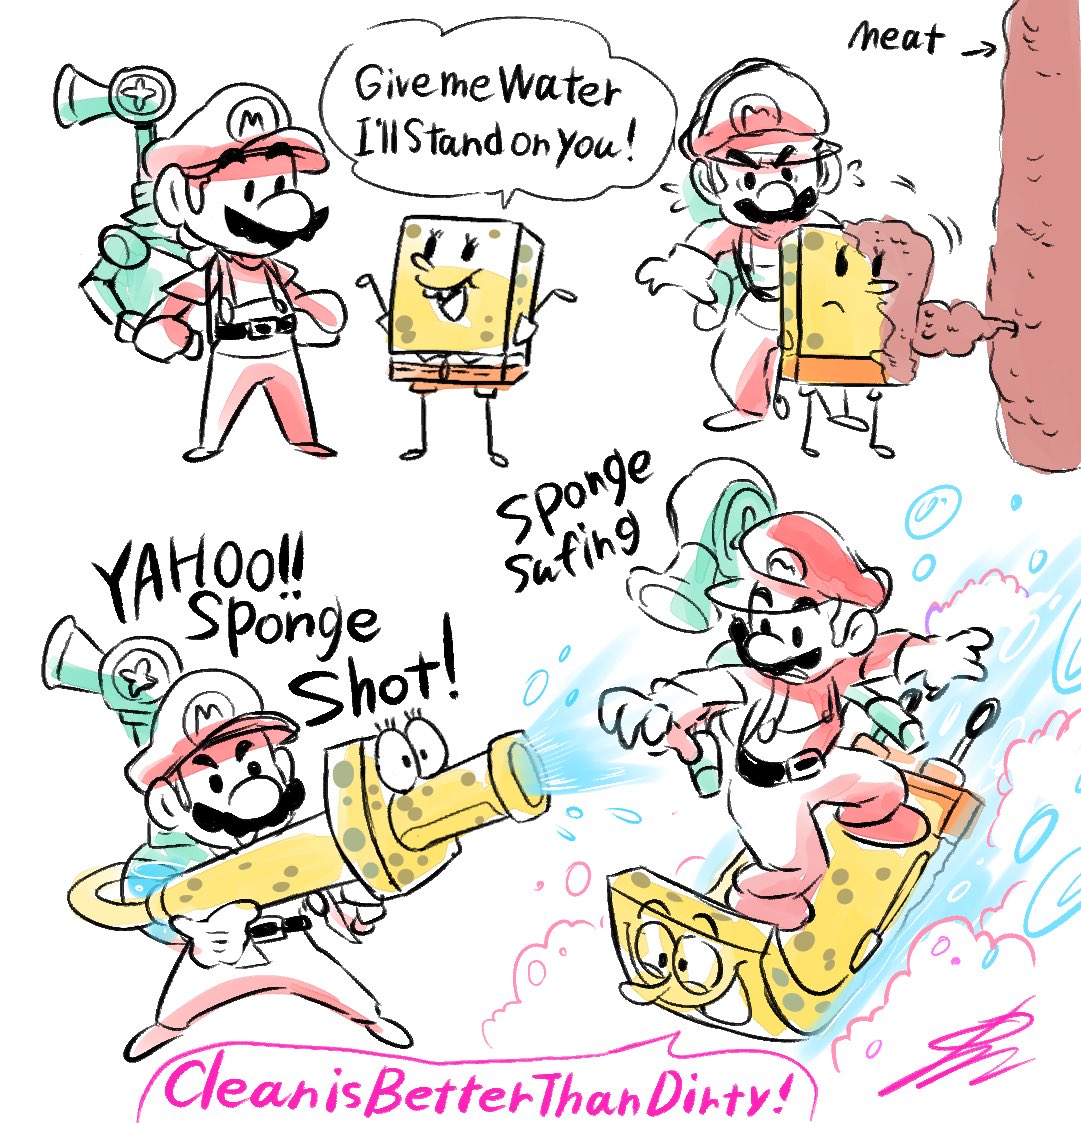 Mario Sunshine 2(headcanon doodles)

This sponge should be able to handle water better and extend more functionality.

Clean is Better Than Dirty!! 